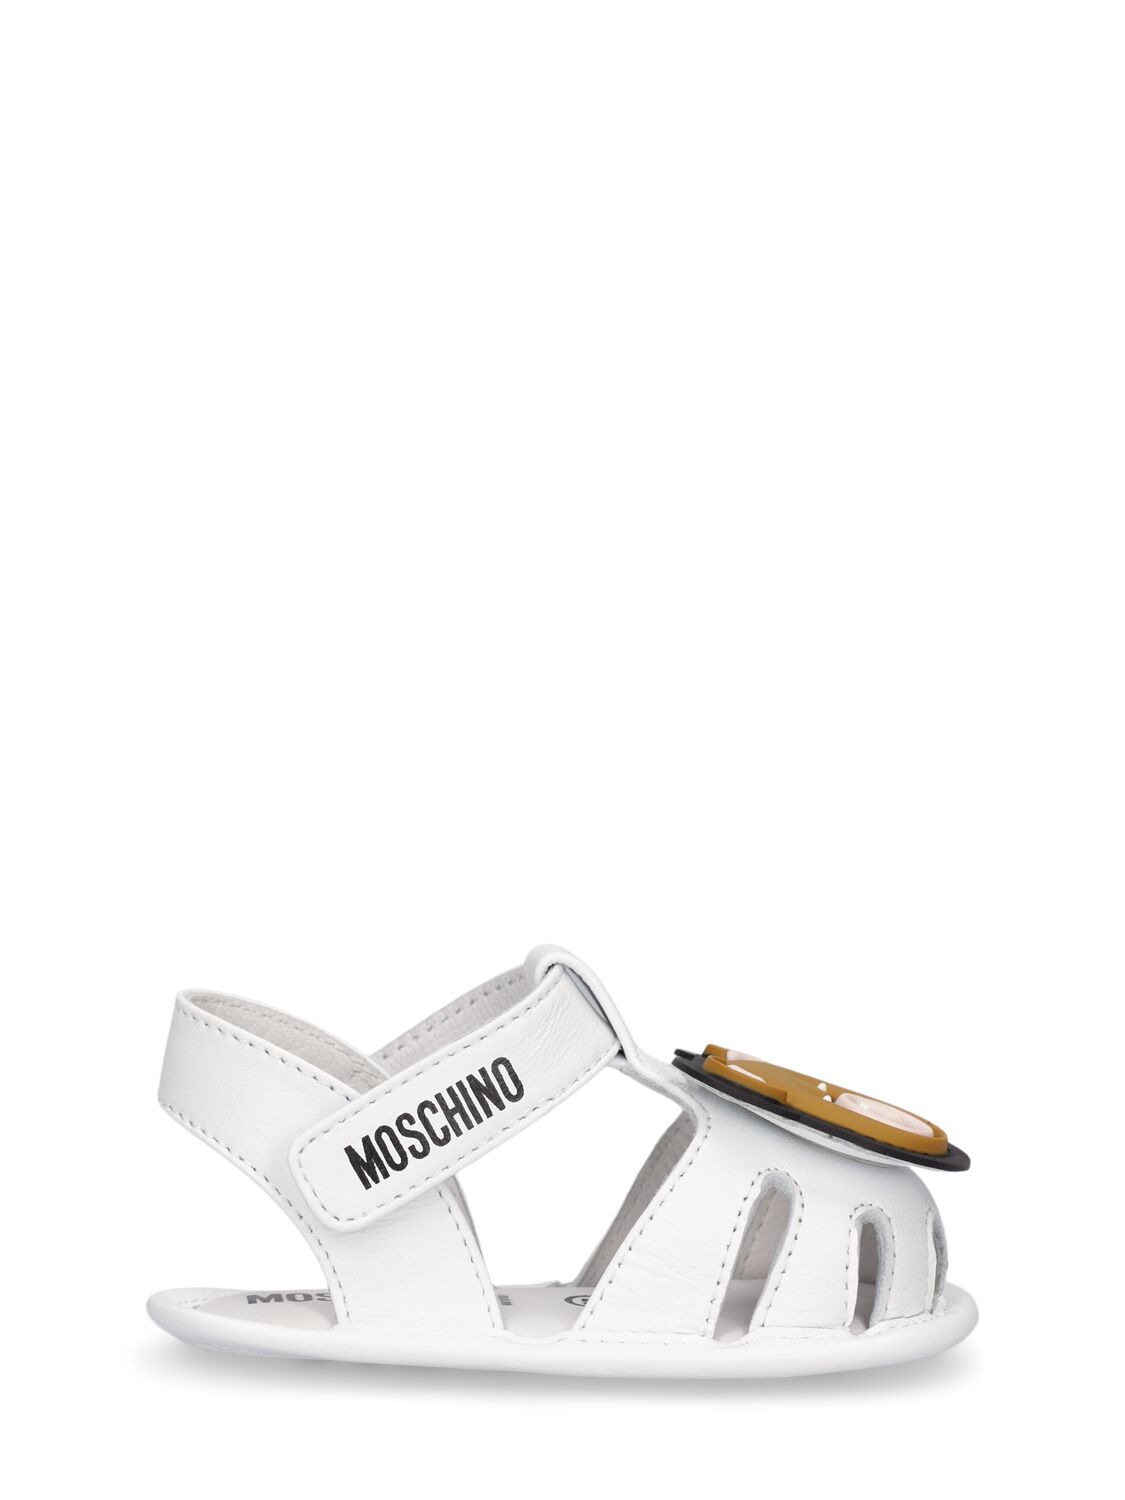 Moschino Kids' Teddy Patch Leather Strap Sandals In White